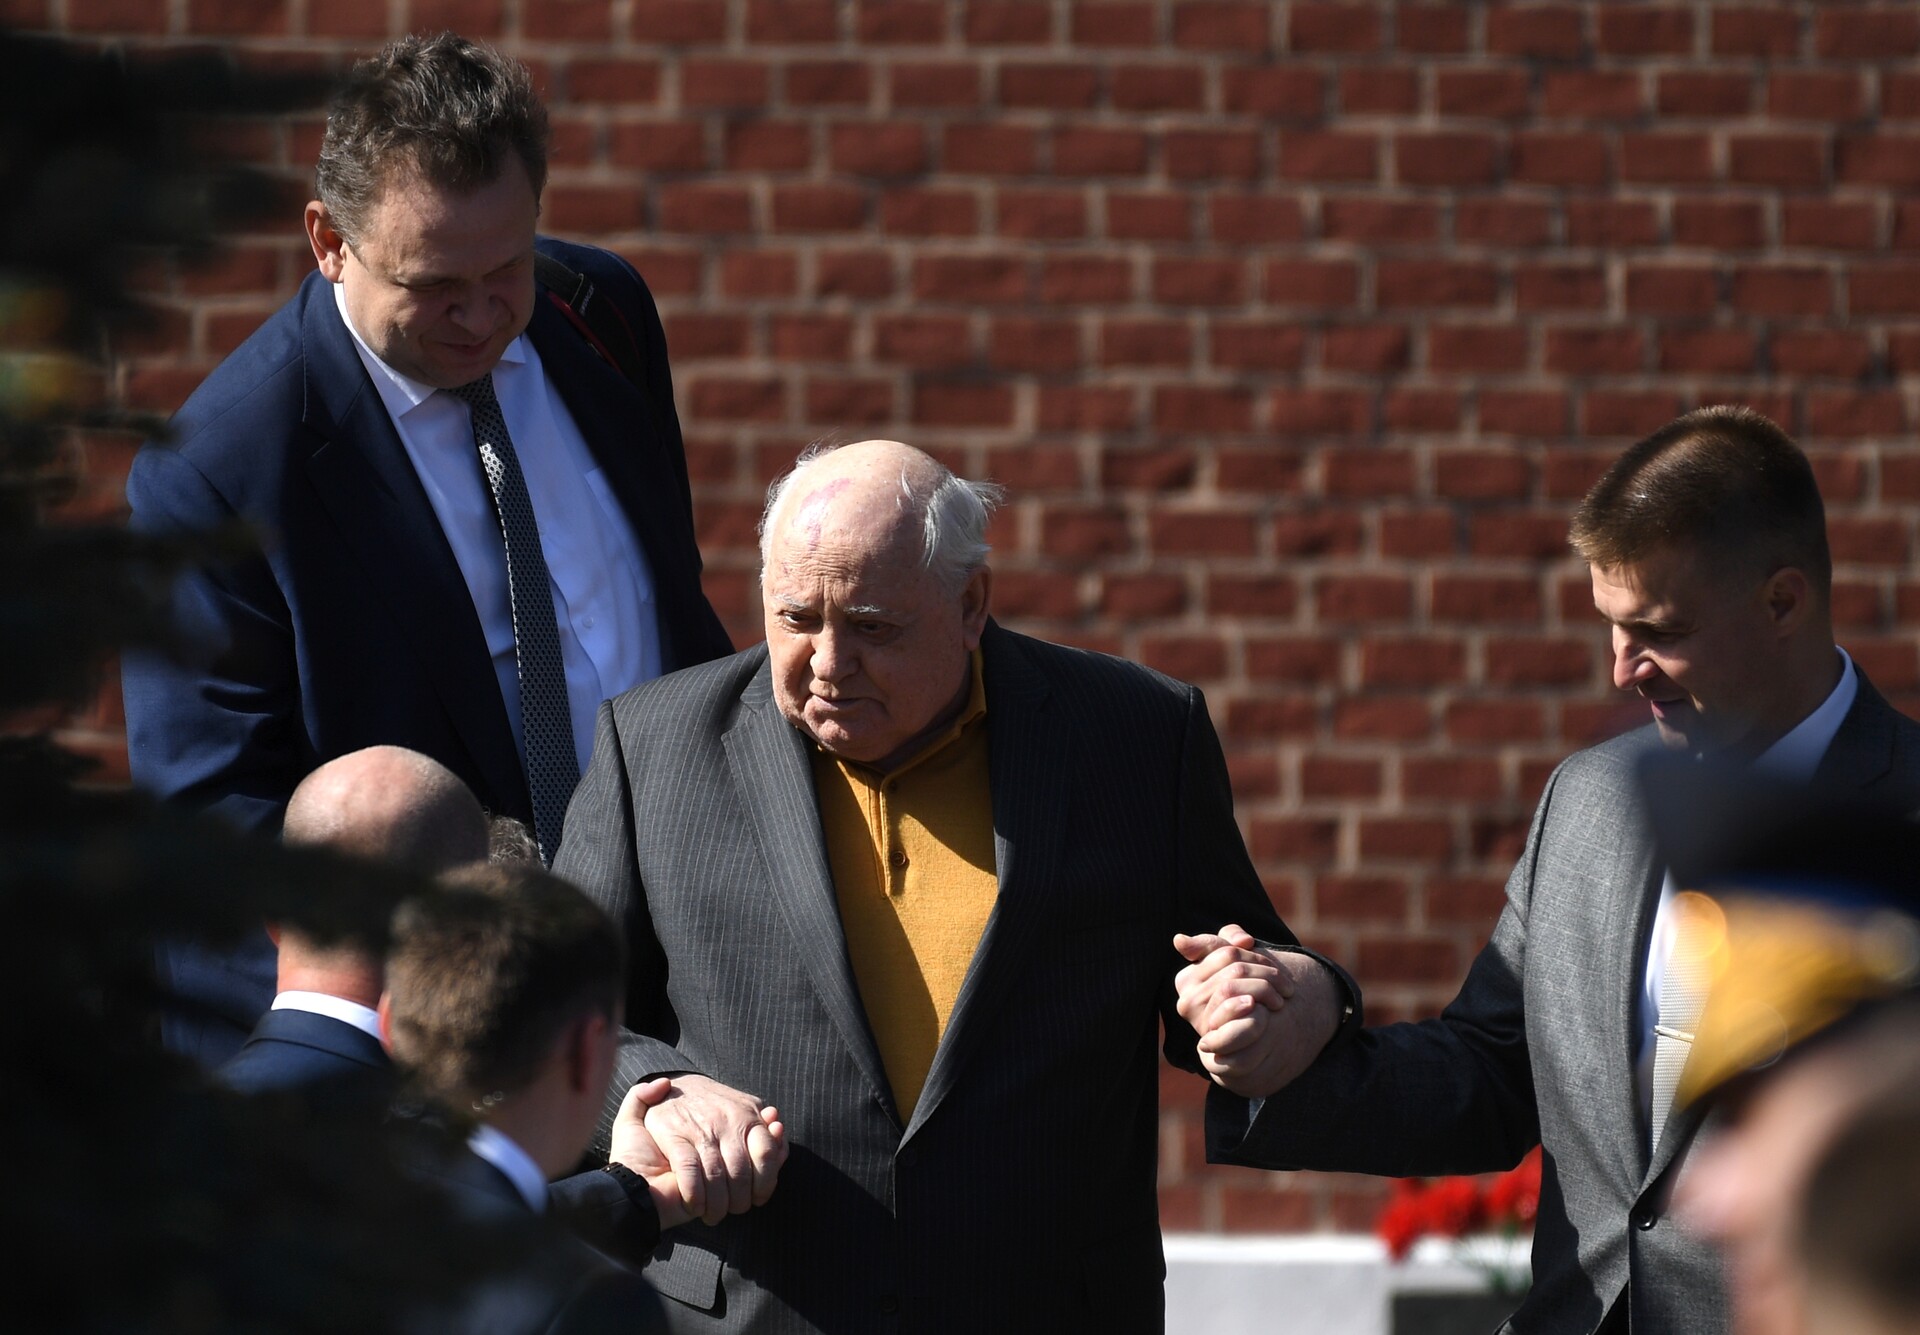 Mikhail Gorbachev before the military parade to mark the Victory Day, 2018